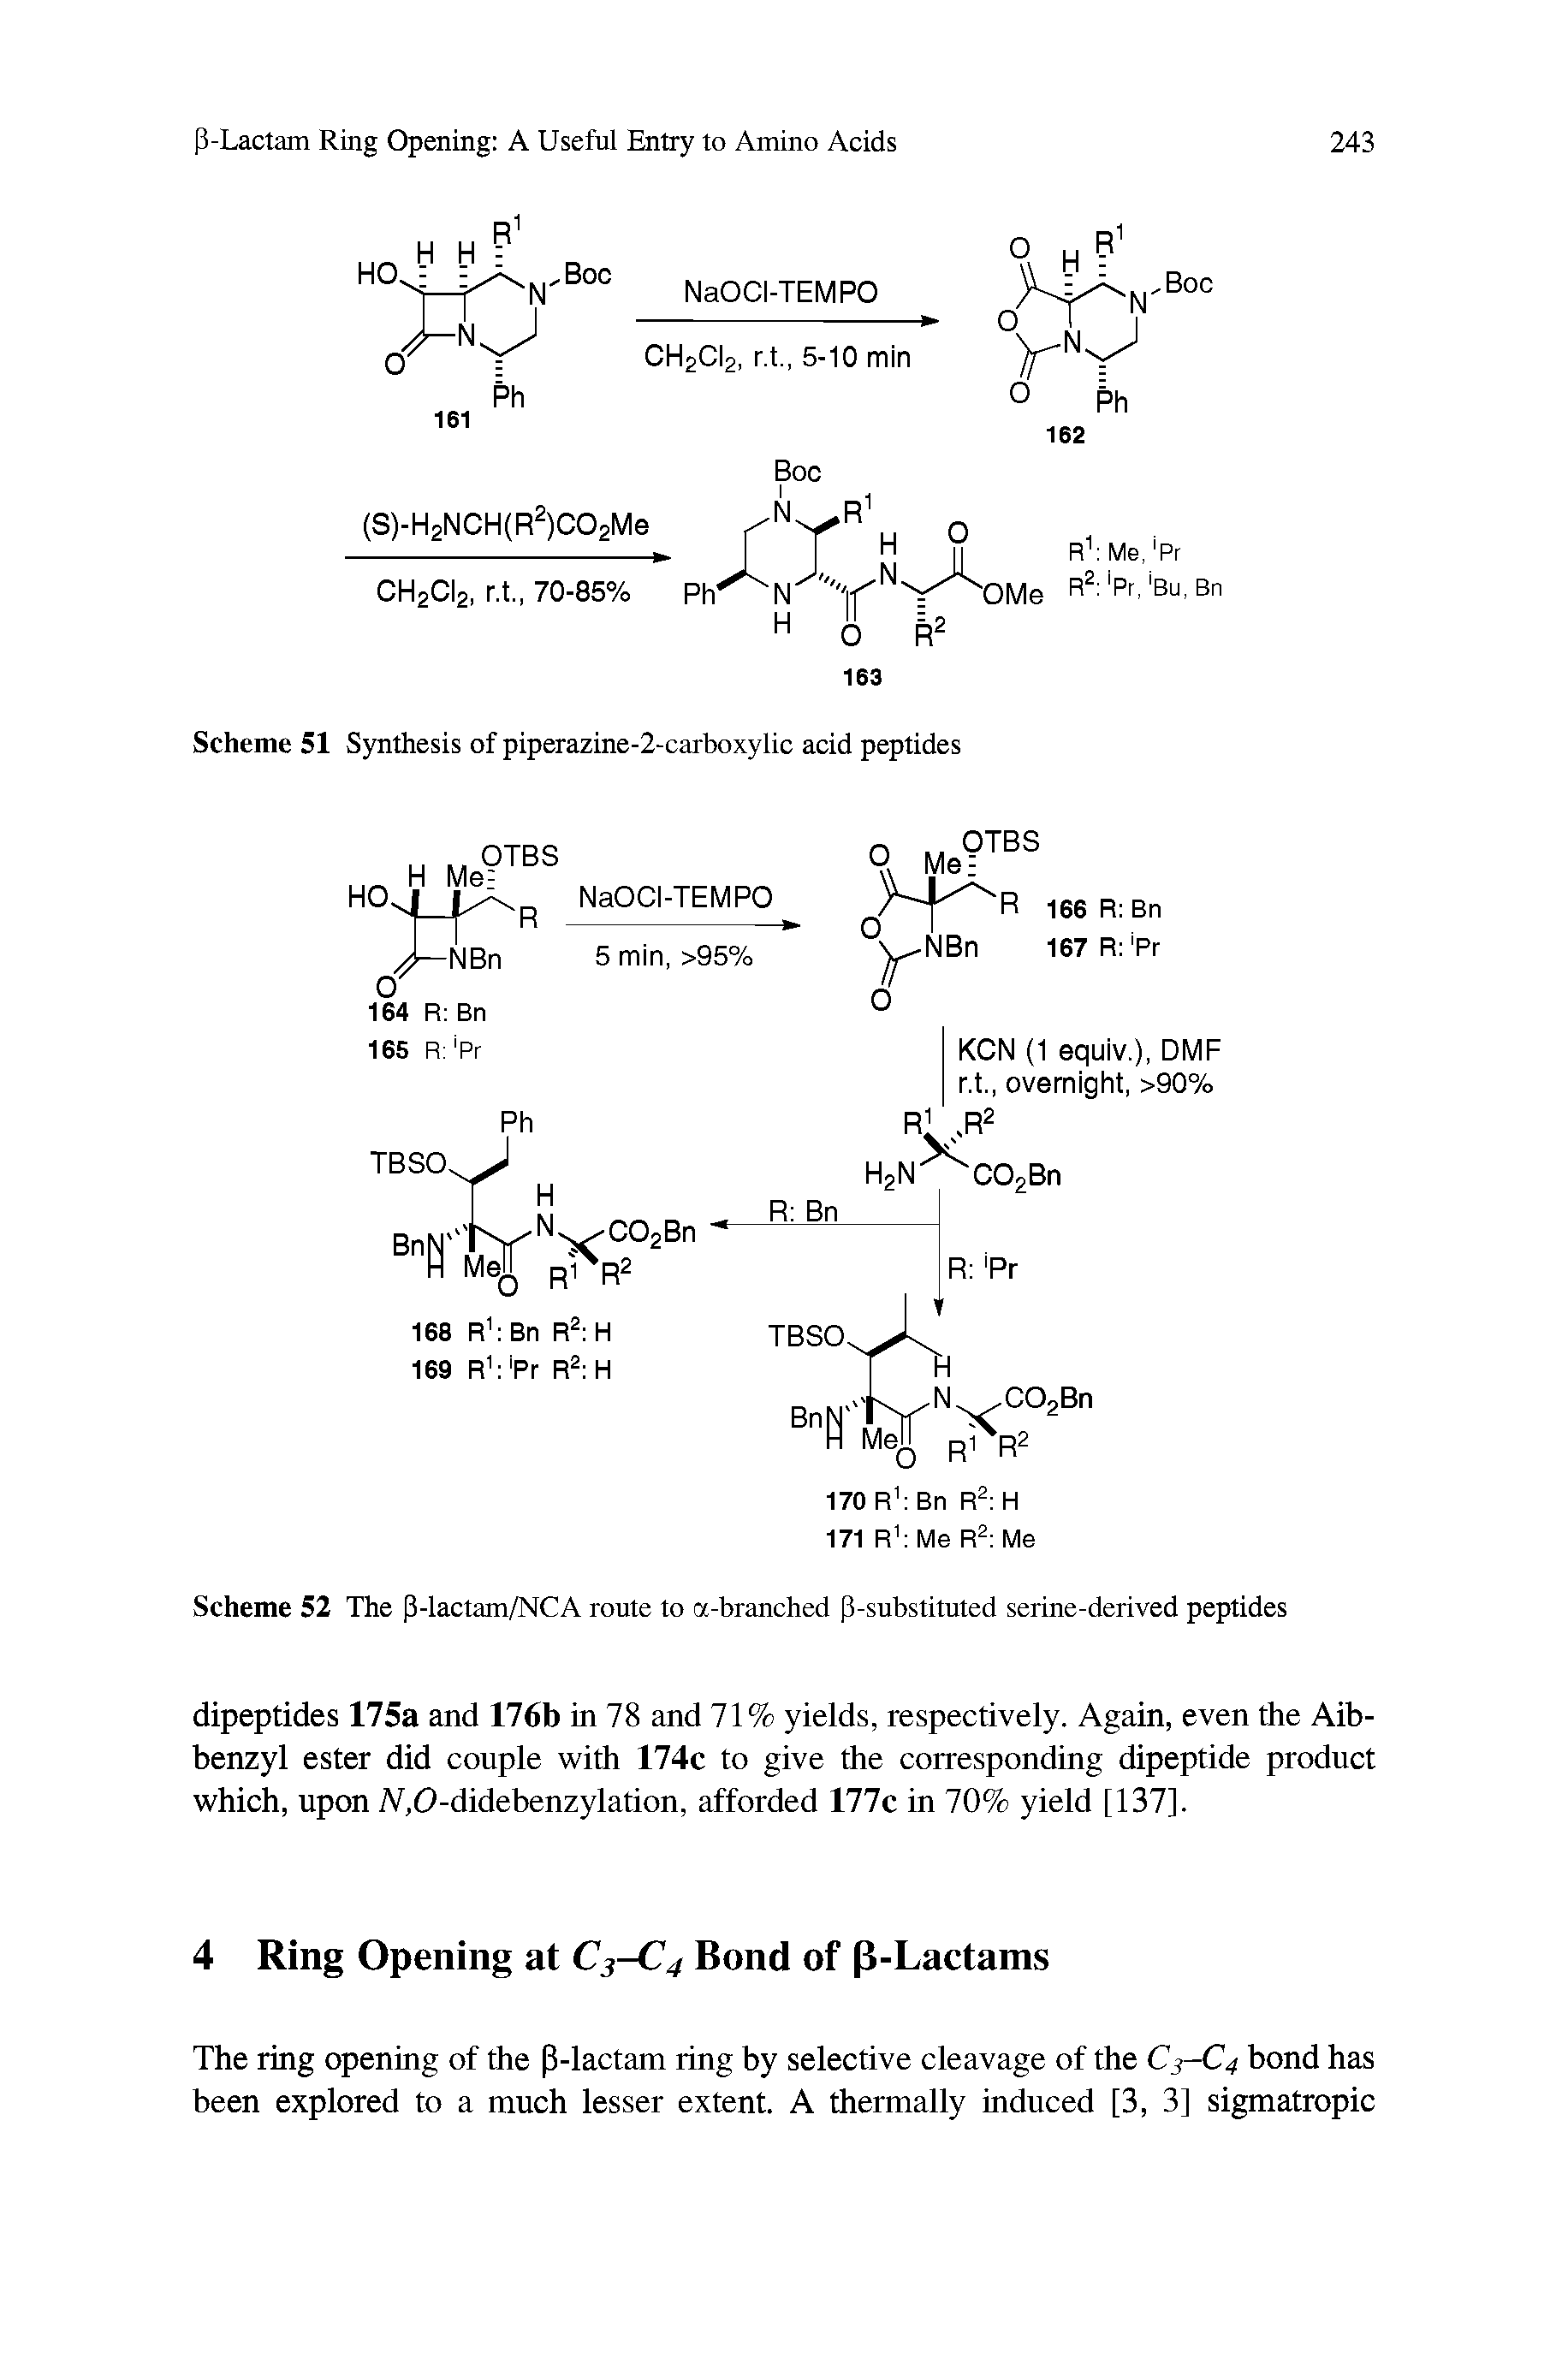 Scheme 51 Synthesis of piperazine-2-carboxylic acid peptides...